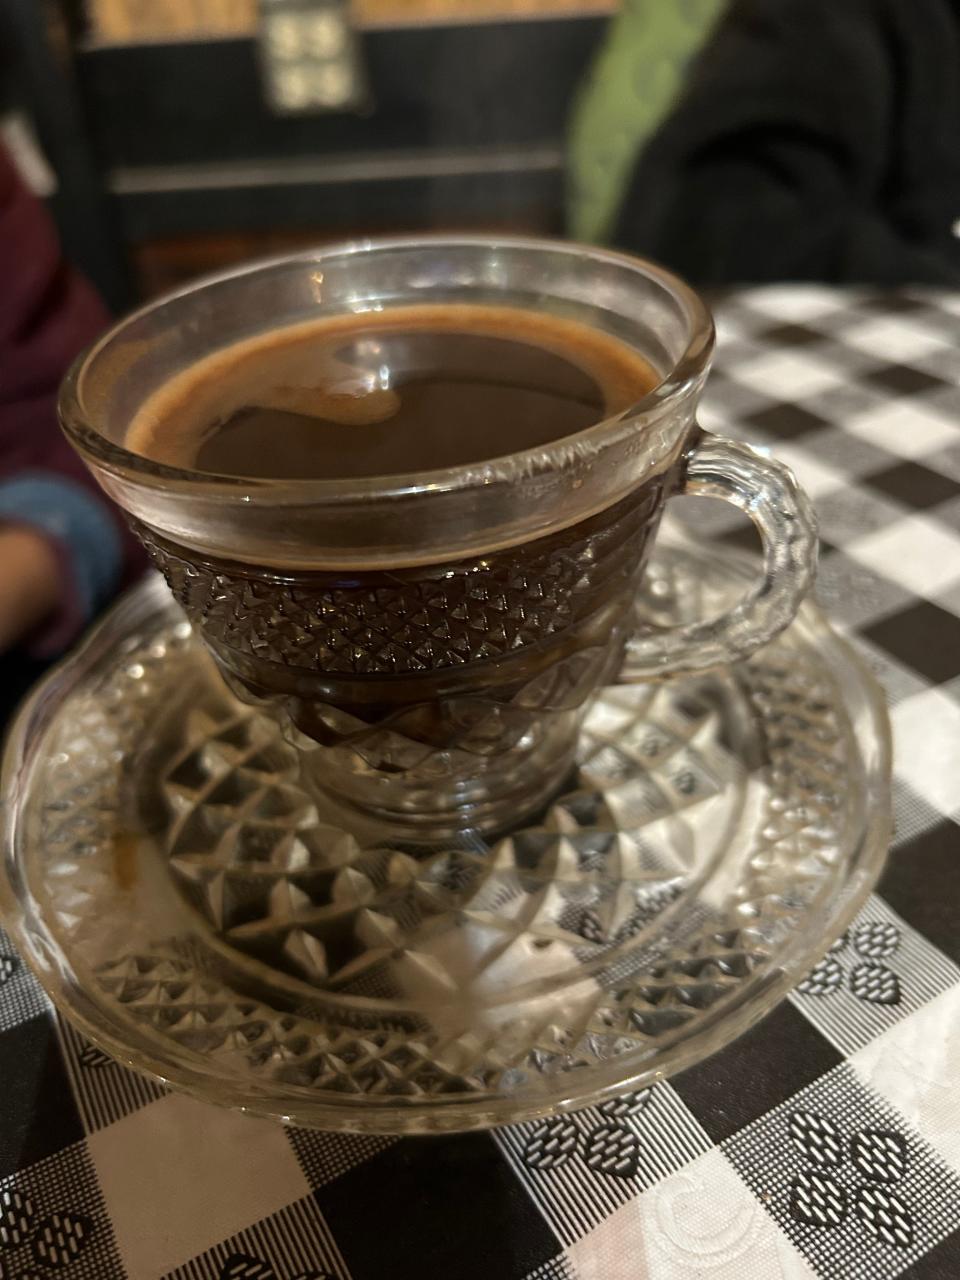 Thick, strong Turkish coffee is offered at Mid-East Cafe and Restaurant in Akron.